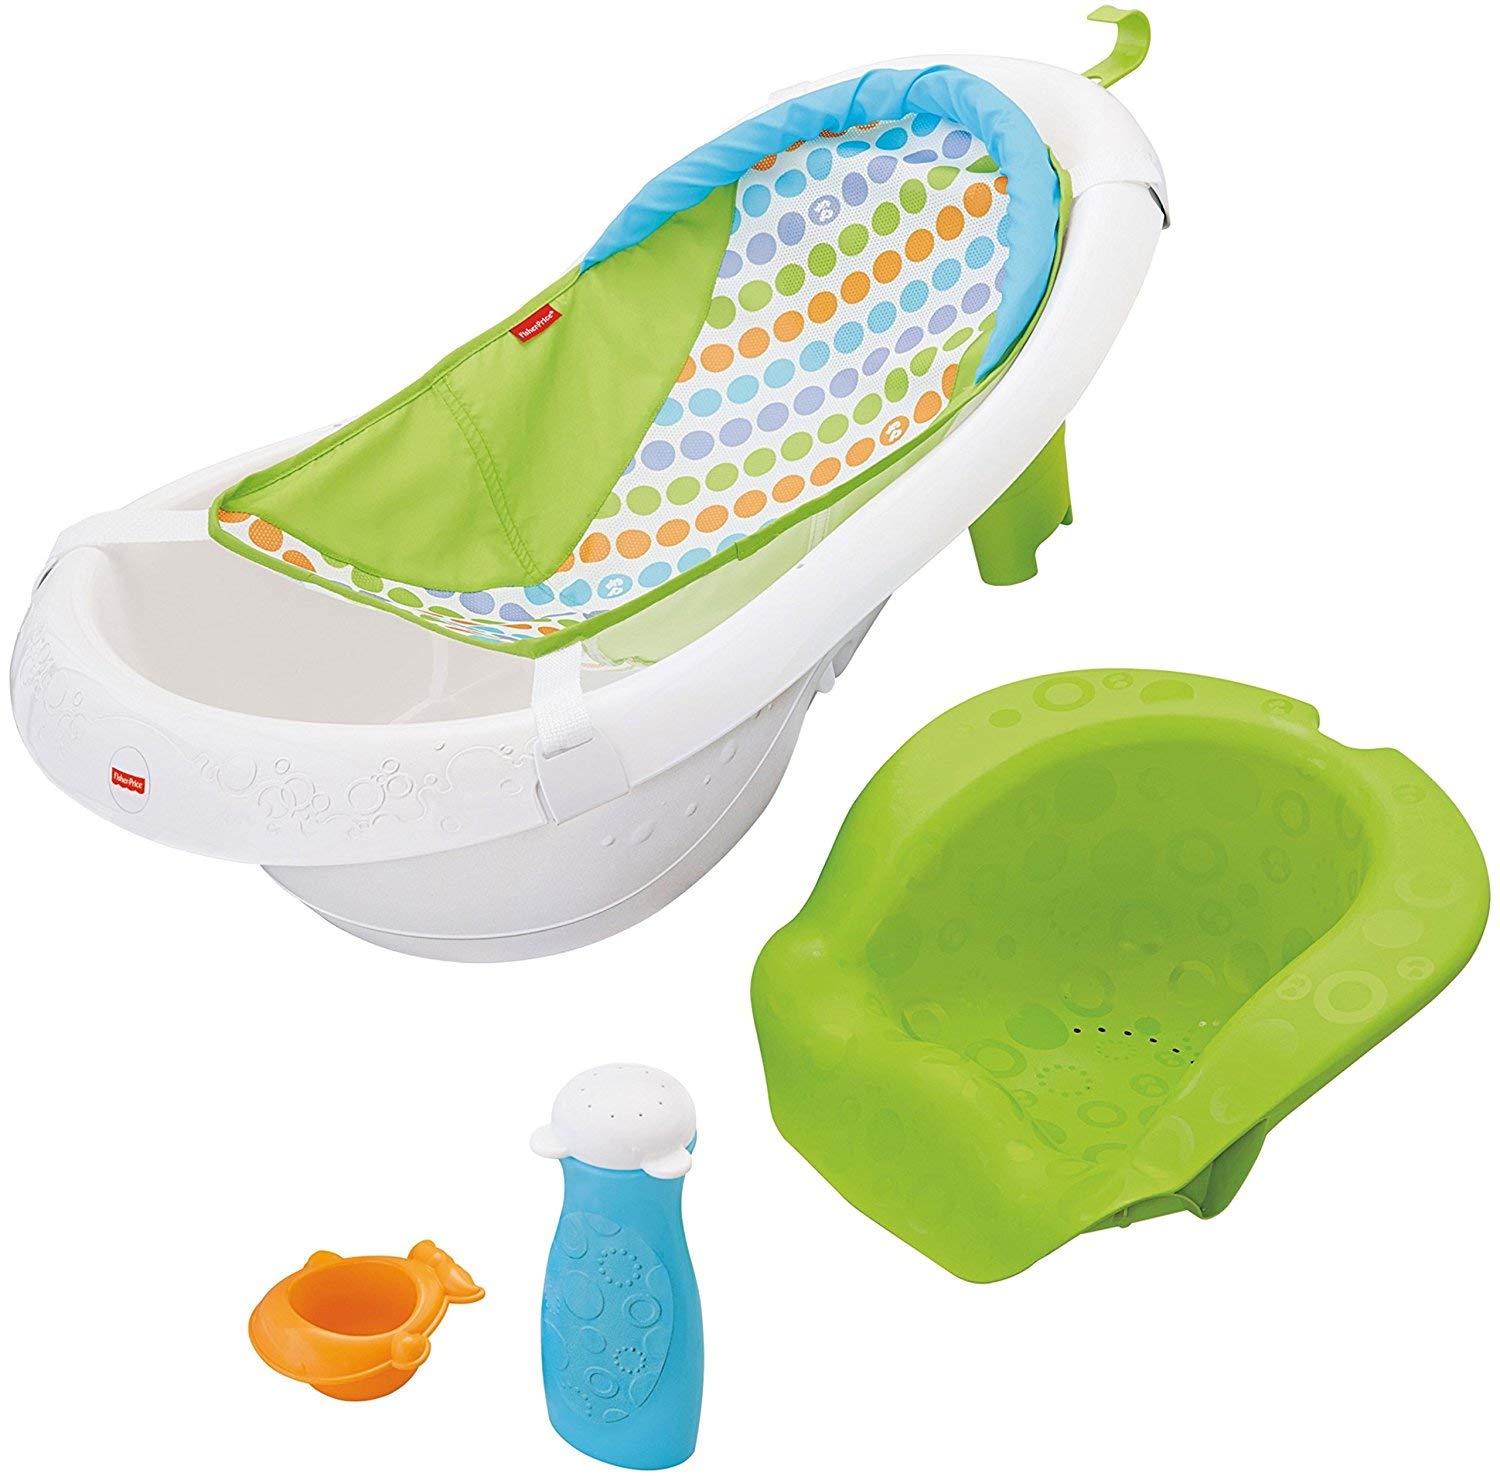 Top 7 Best Infant Tubs For Newborn Reviews in 2022 4